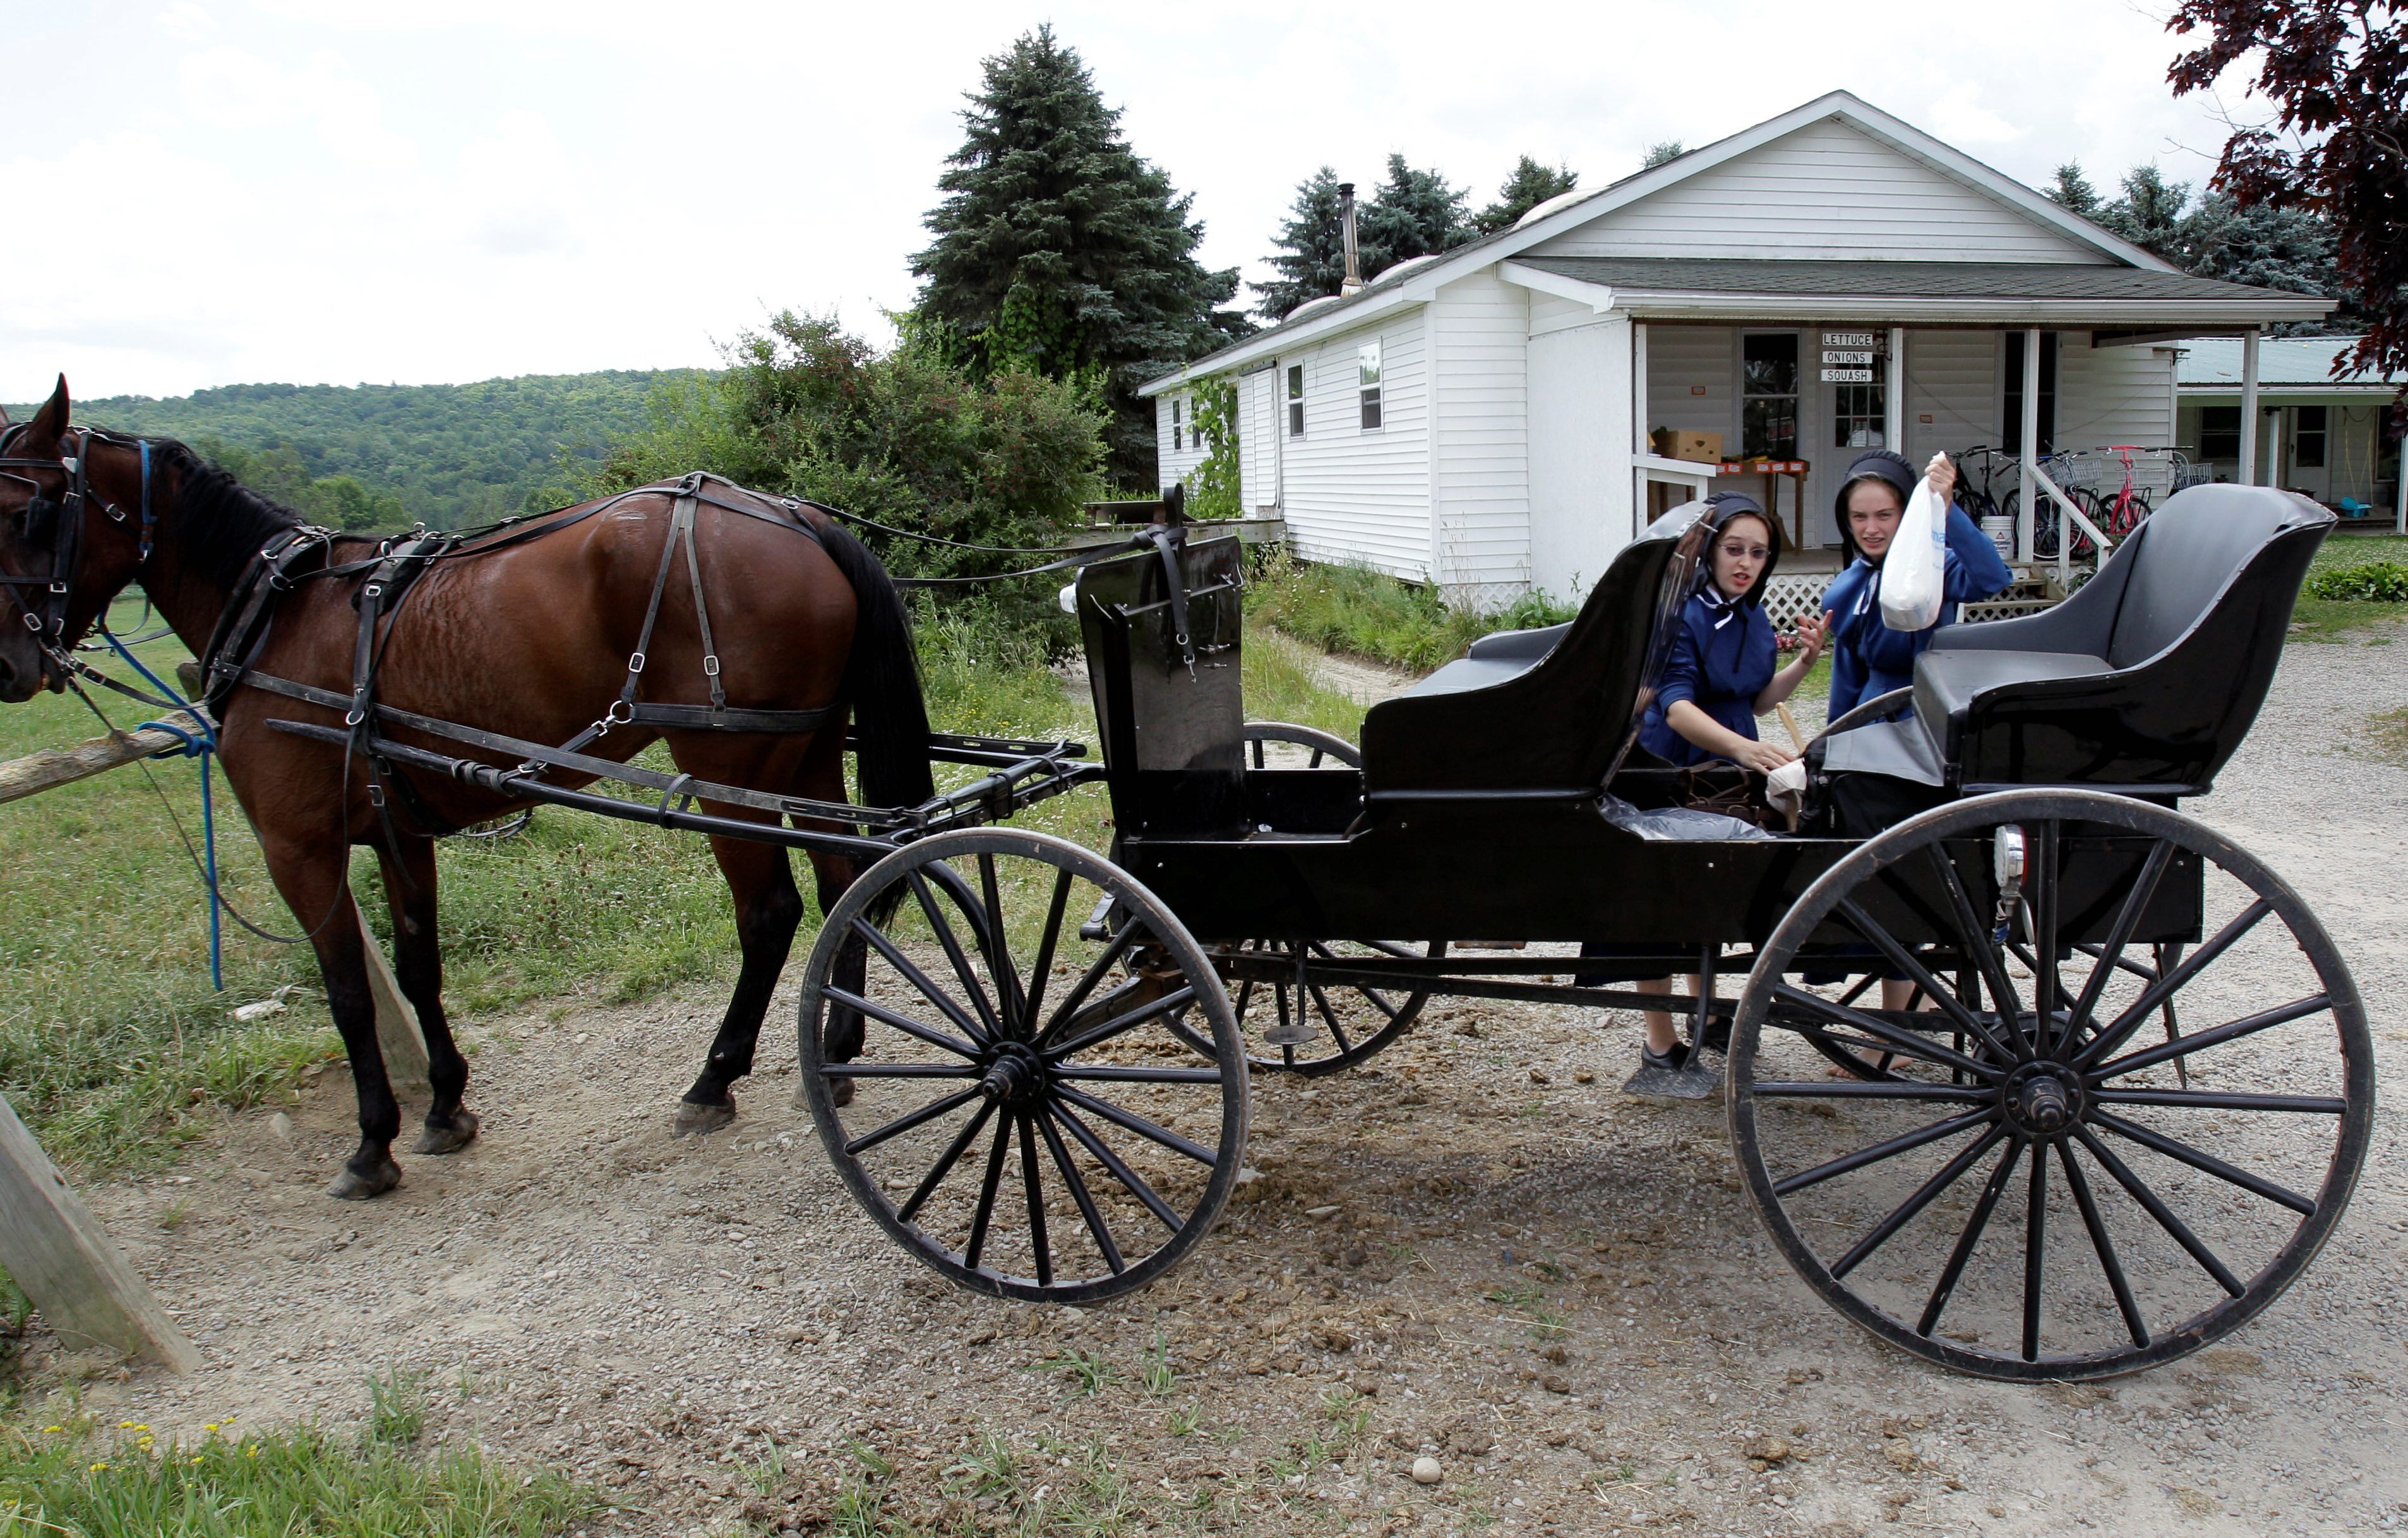 Amish culture in a high tech society